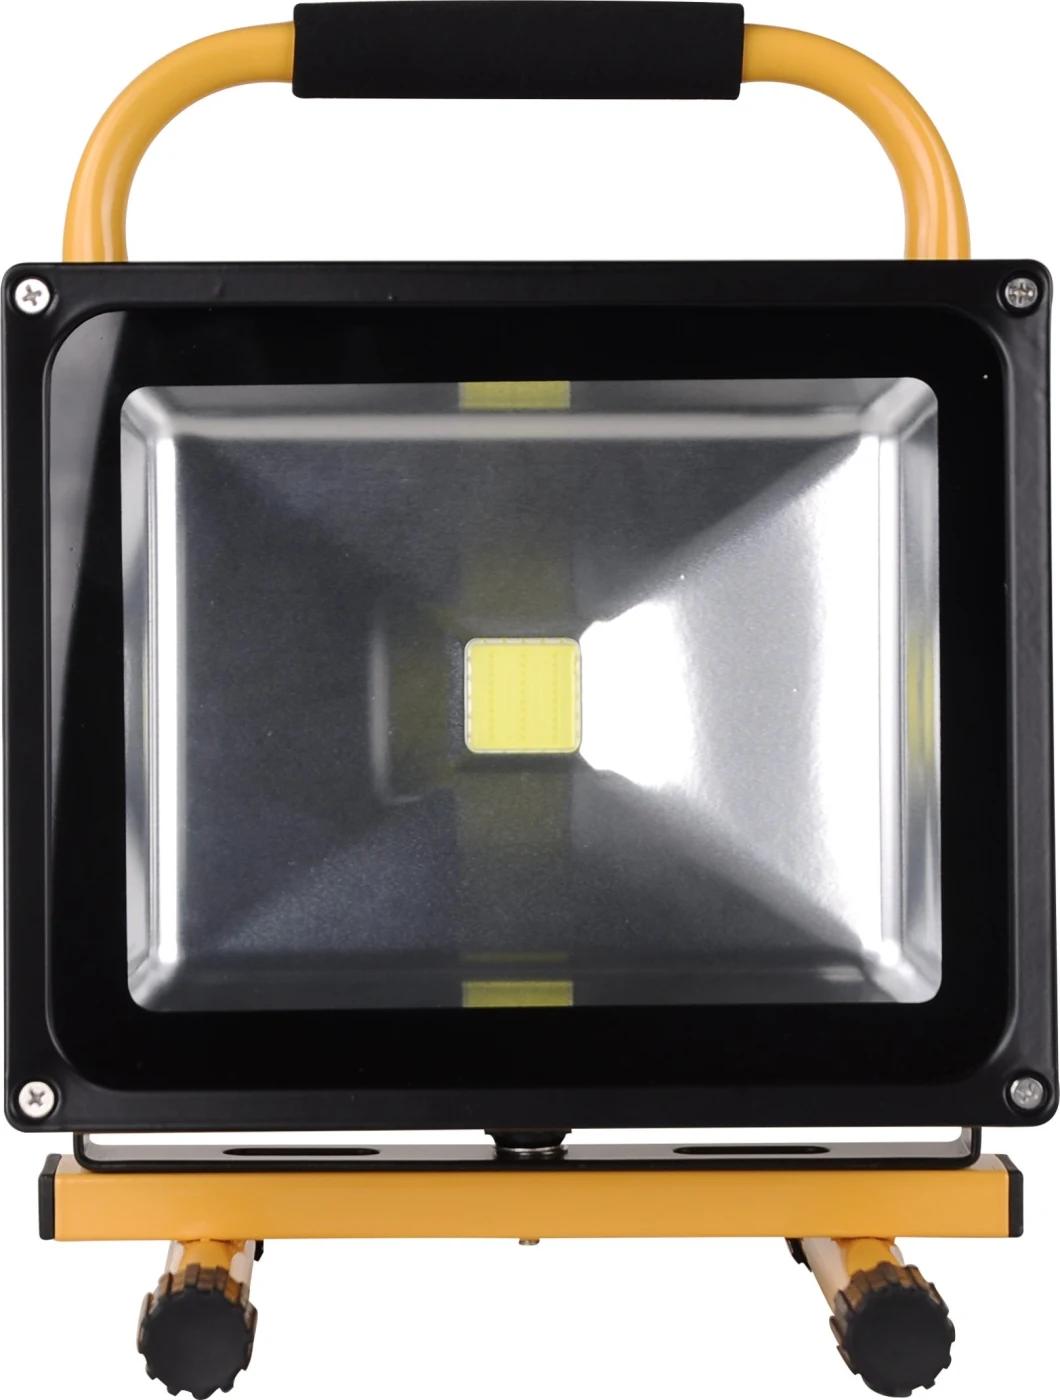 30W White LED portable Rechargeable Camping Floodlight